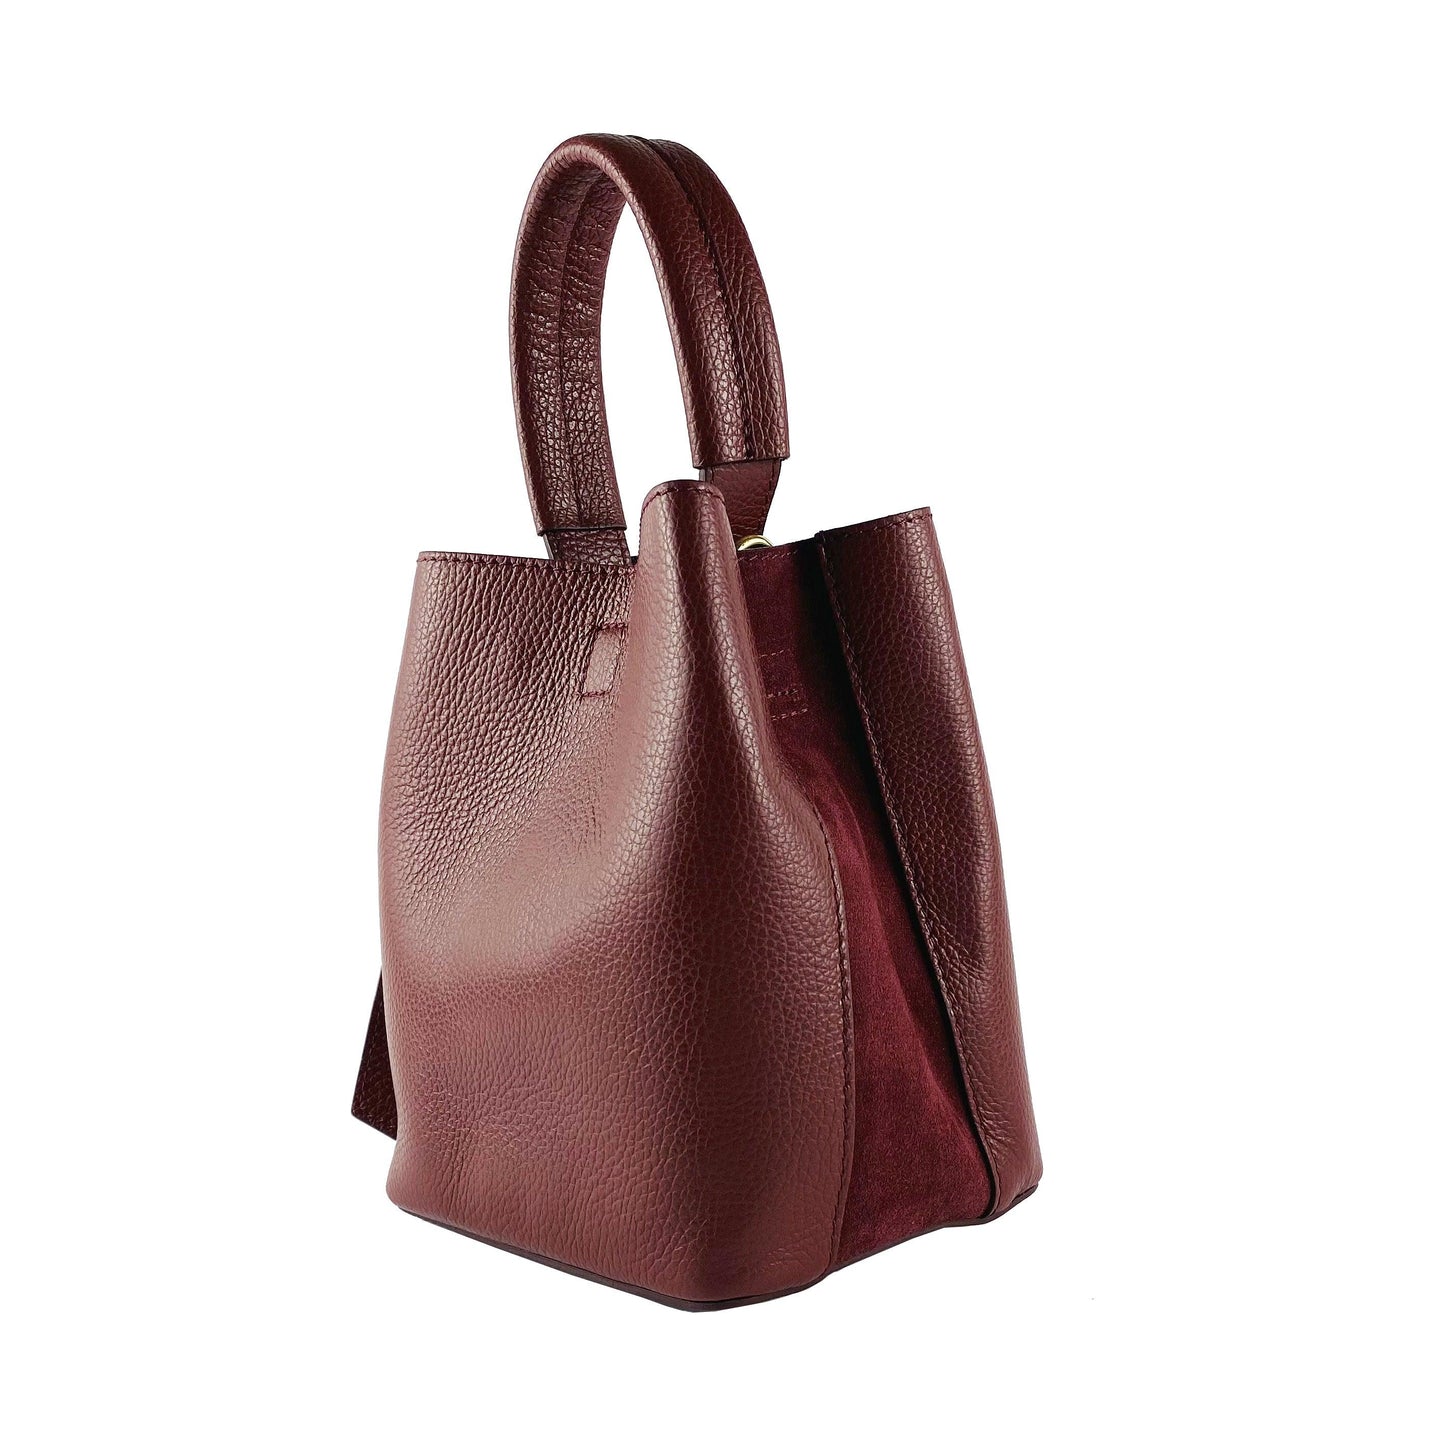 RB1006X | Women's Bucket Bag with Shoulder Bag in Genuine Leather | 16 x 14 x 21 cm-1